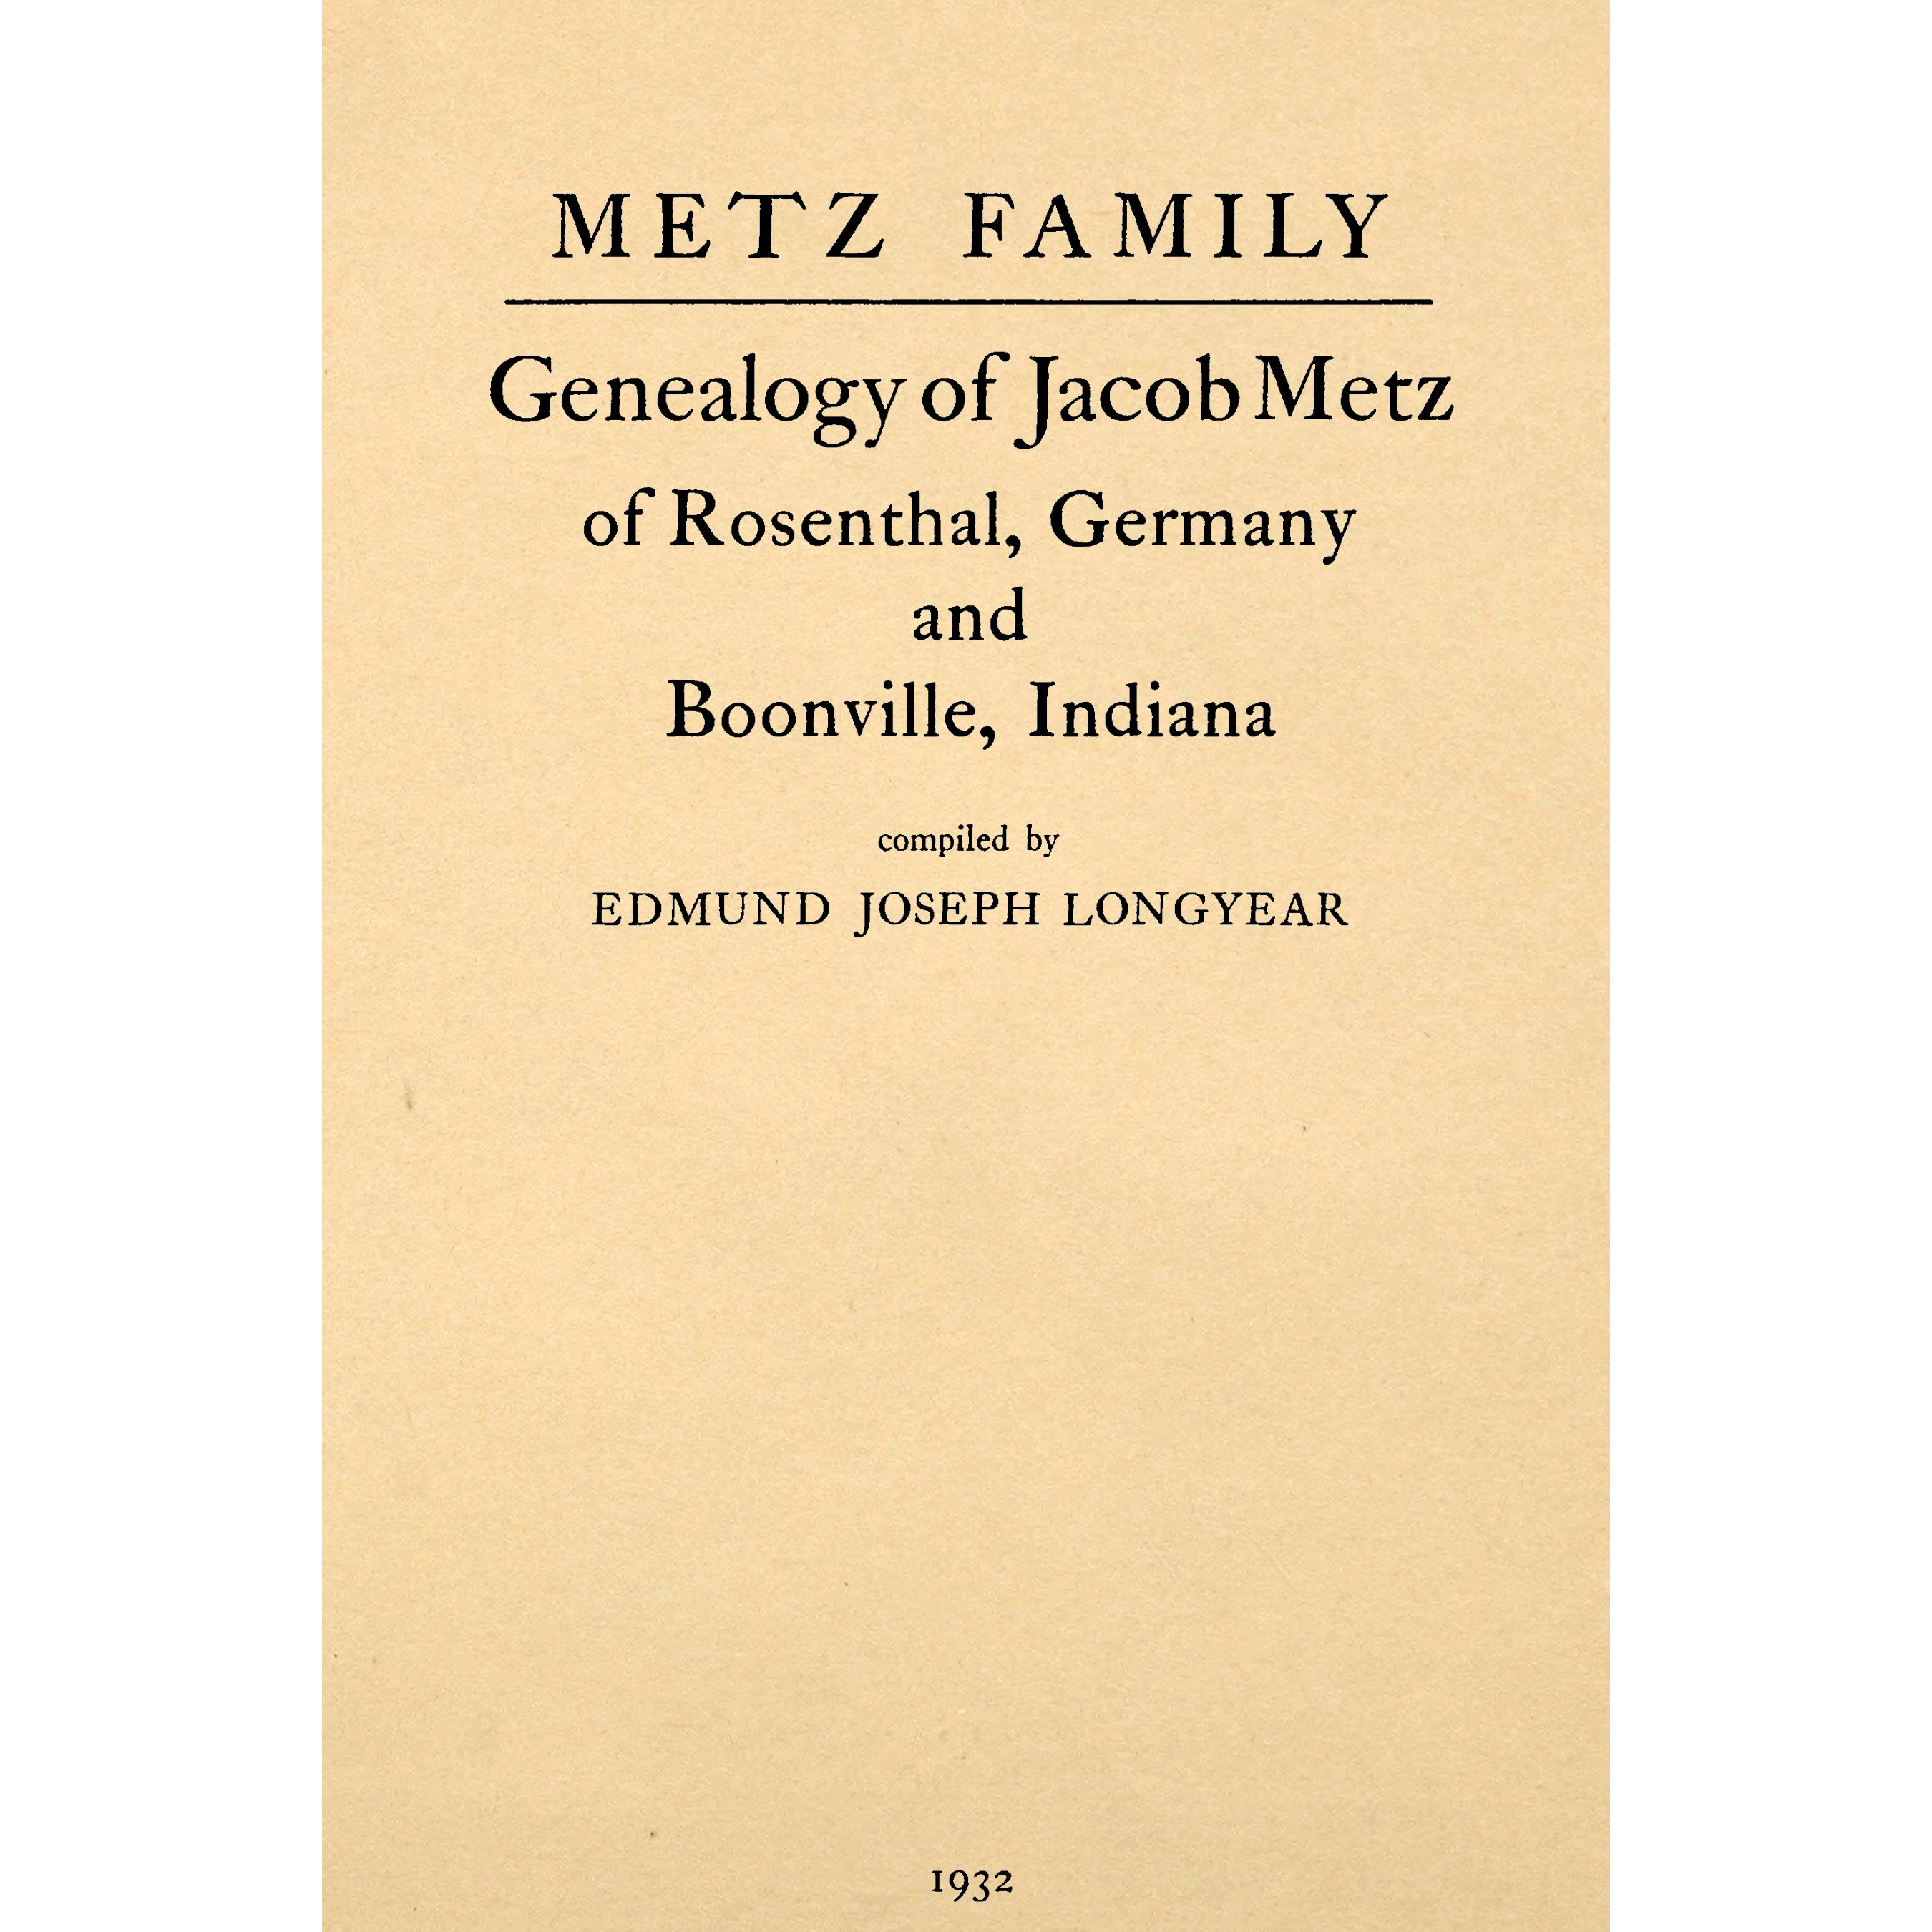 Metz family; genealogy of Jacob Metz of Rosenthal, Germany, and Boonville, Indiana